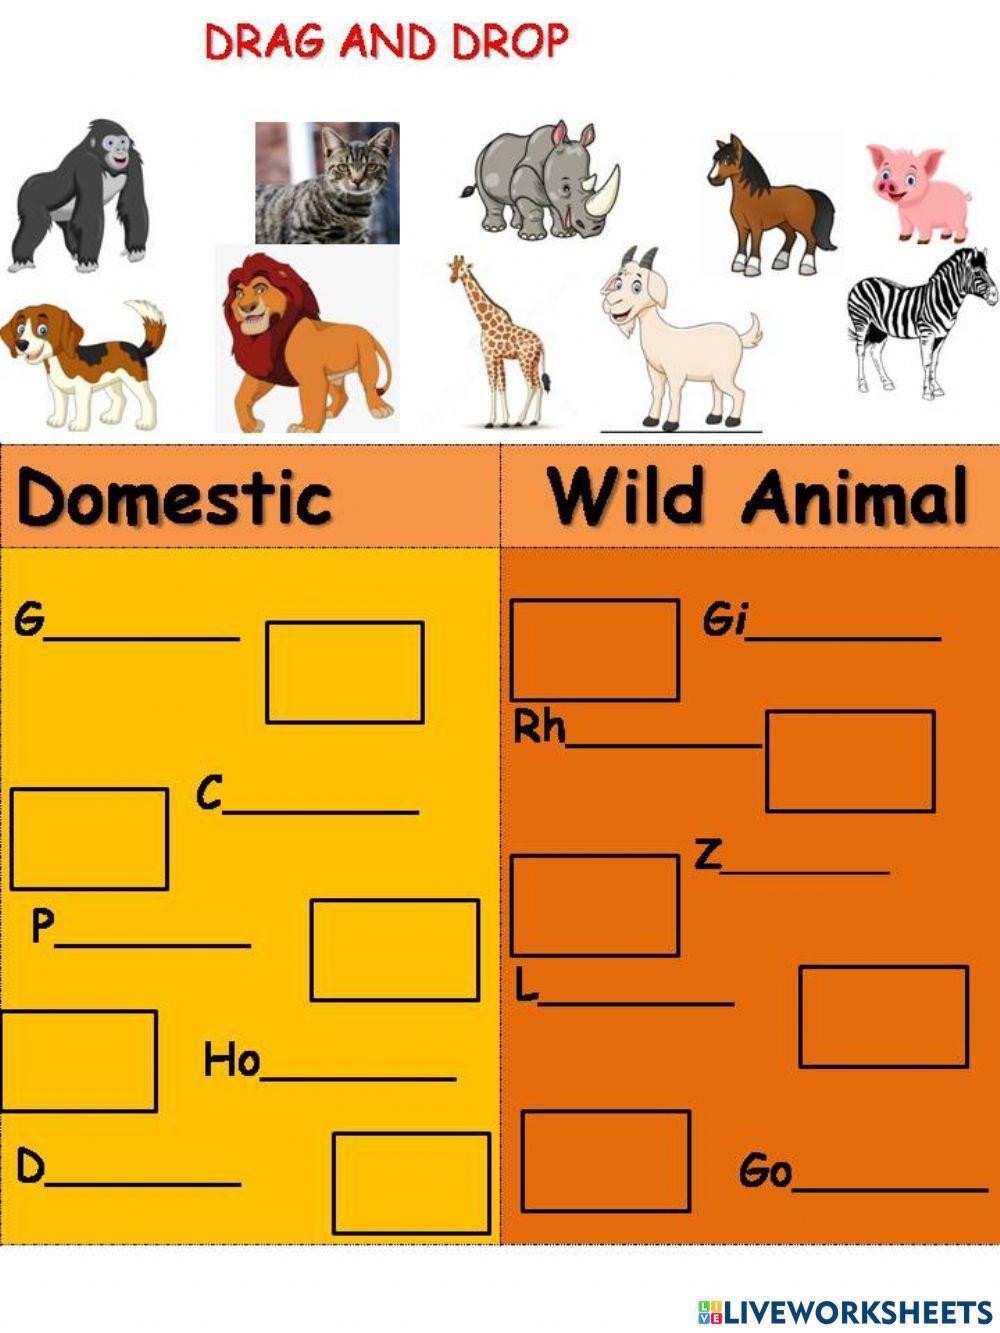 Domestic and wild animal